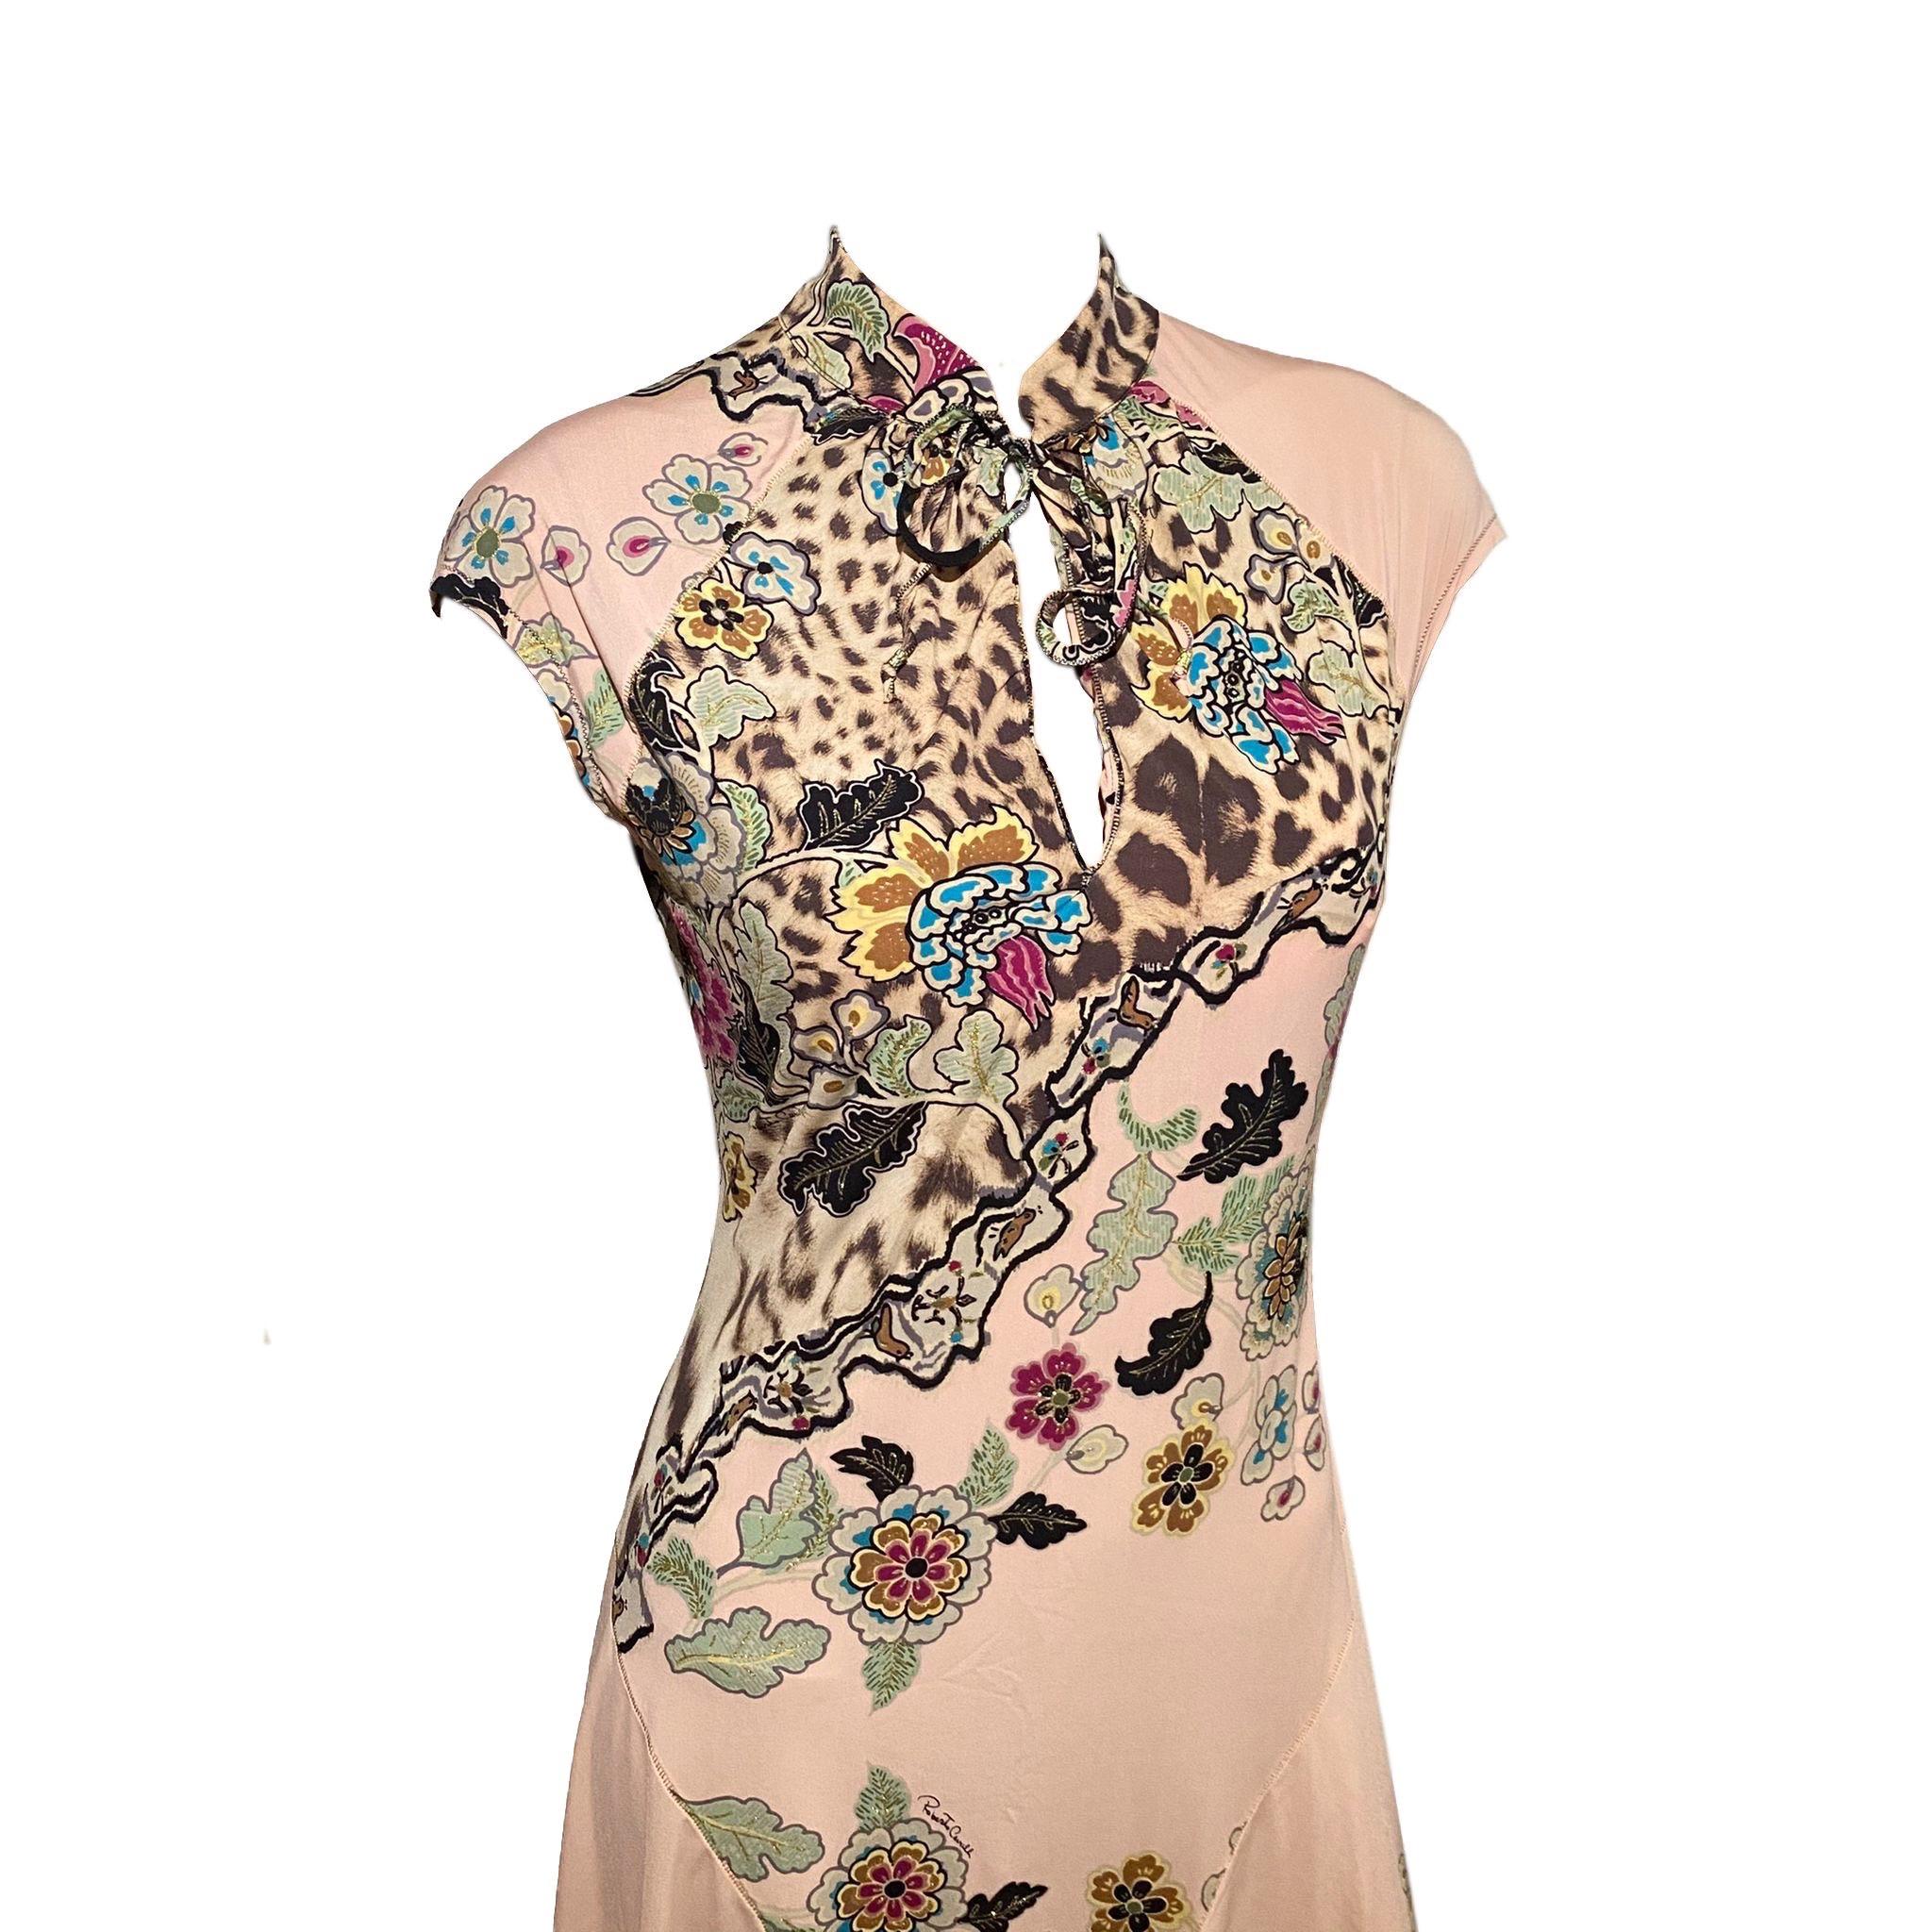 Roberto Cavalli Cheongsam-inspired pink maxi dress with chest cut-out detail from the Spring/Summer 2003 collection. Oriental floral print (with gold glitter lining) and cheetah print, bias cut.

Size M, 90% Polyamide 10% Elastane 

Shoulder to